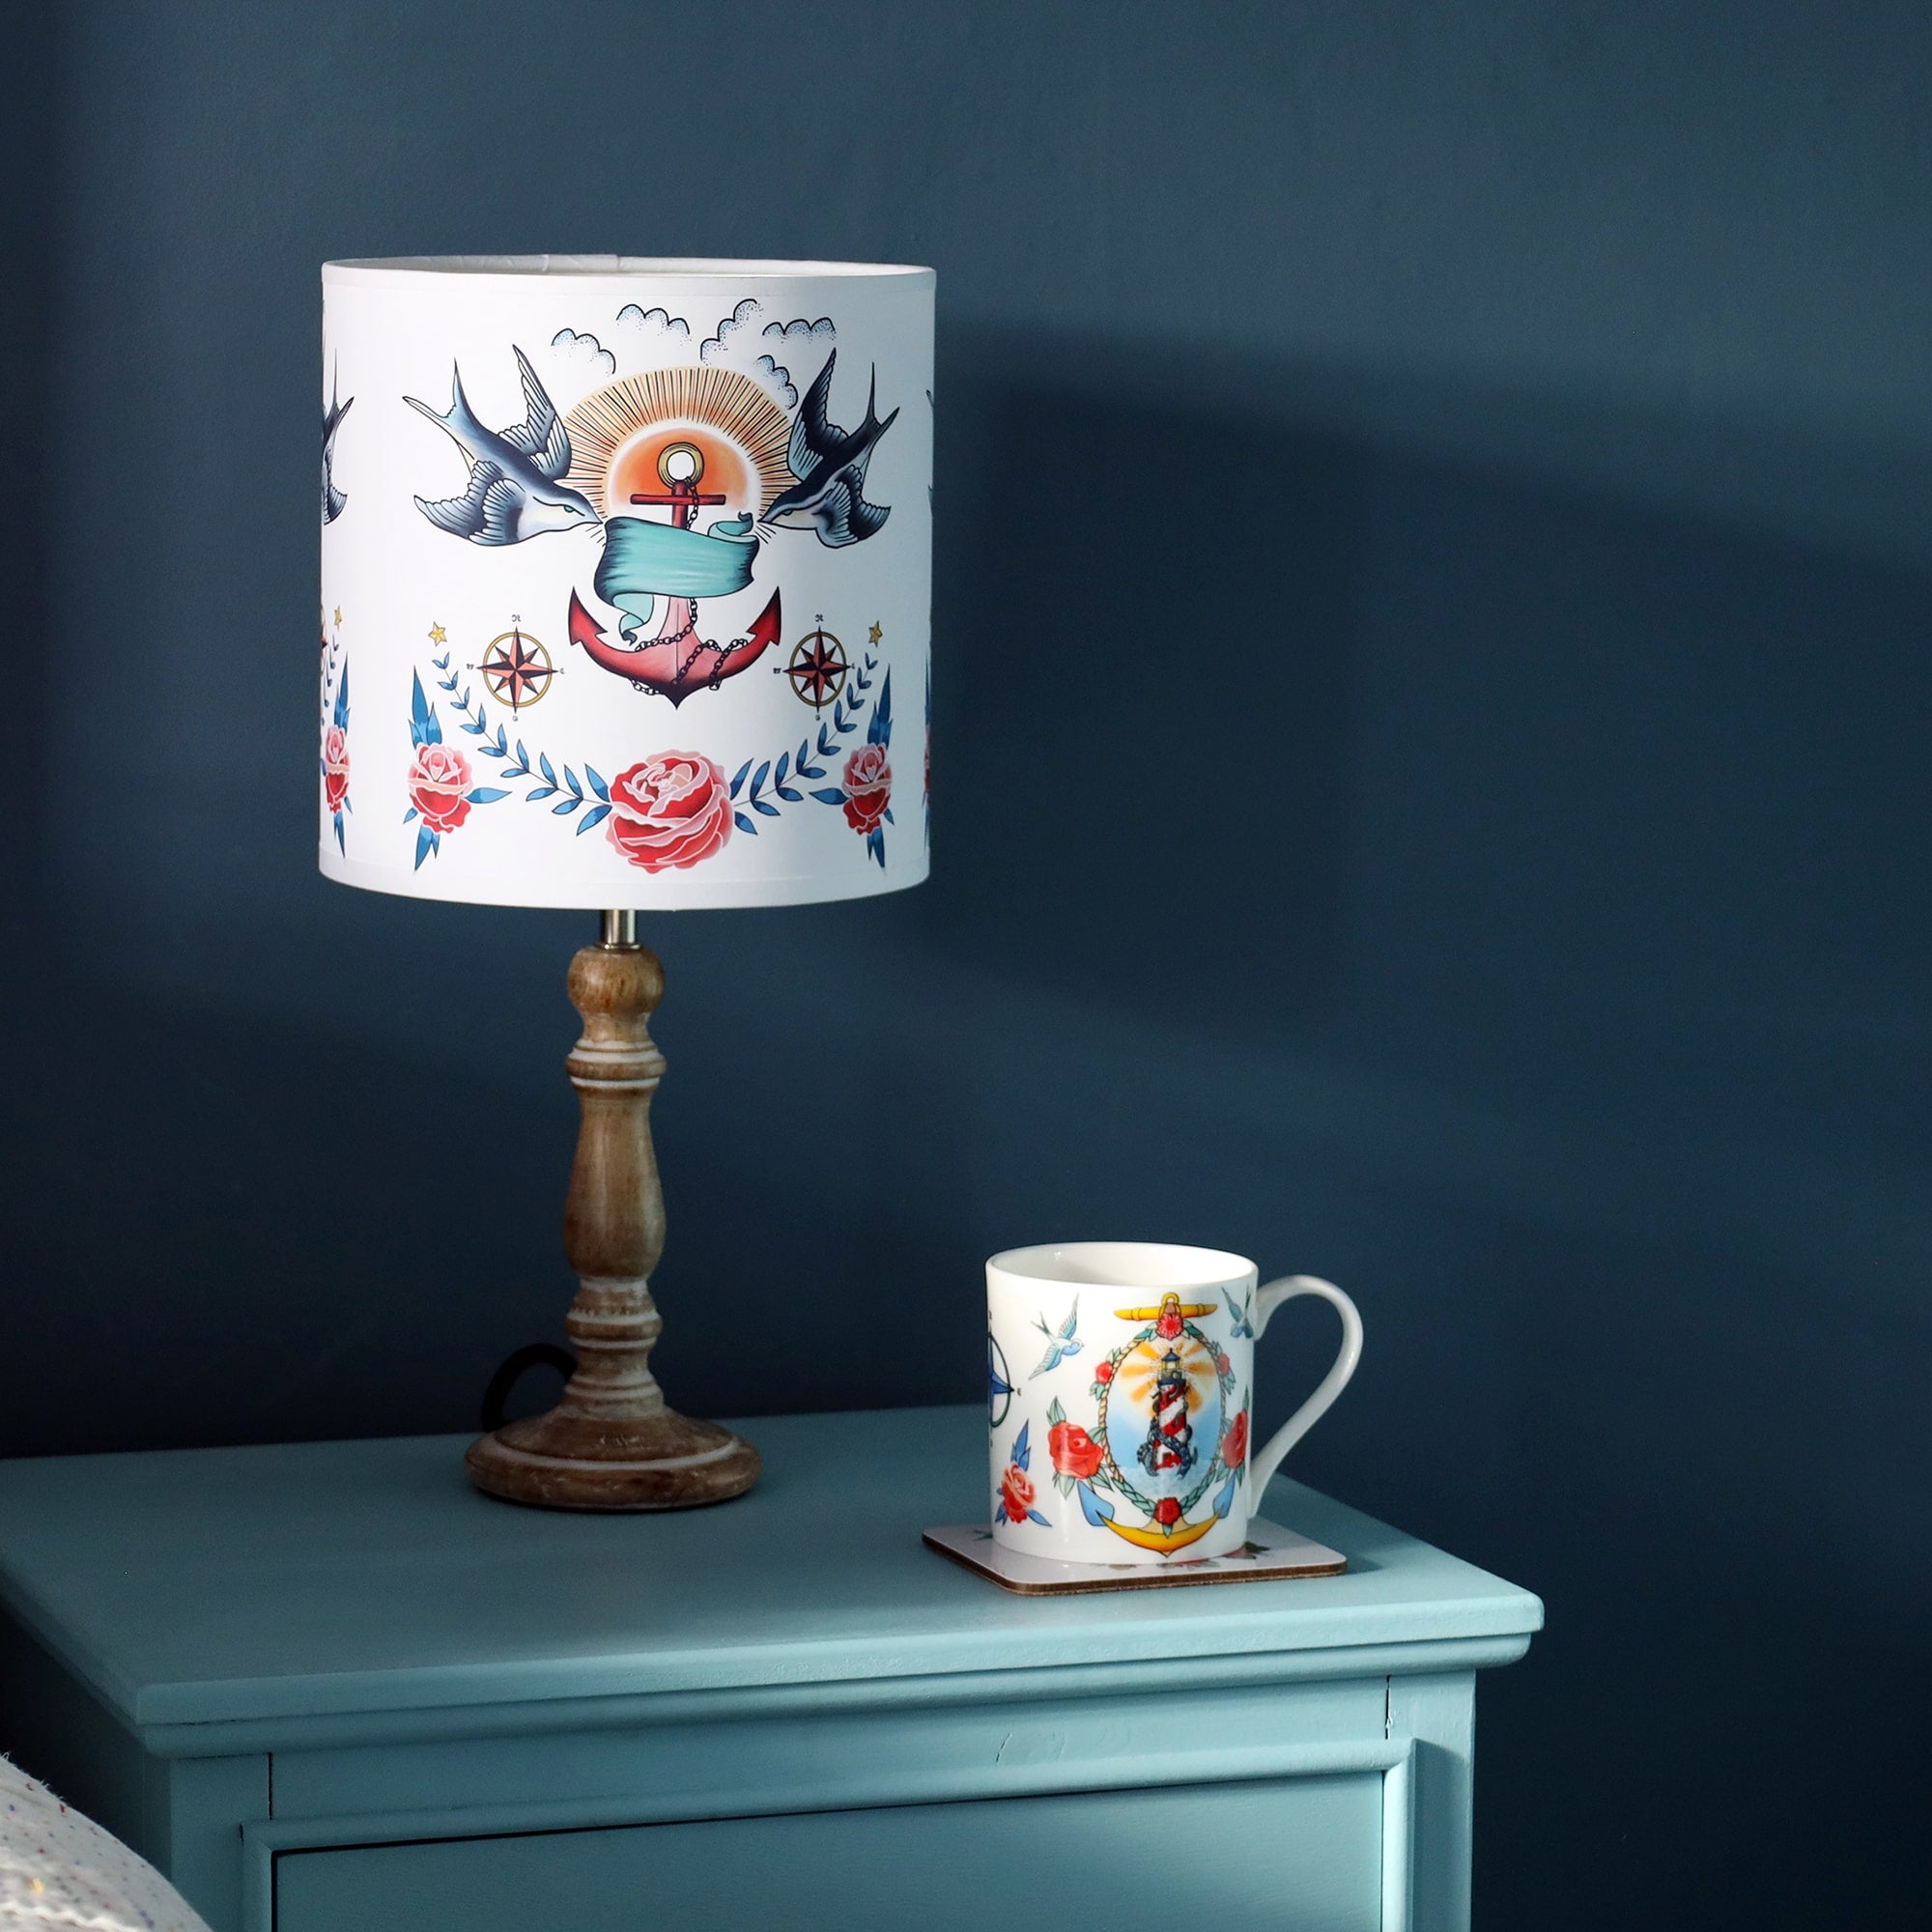 Small pixie whitewashed wooden lamp base with tattoo inspired lampshade with swallows, anchor and roses design, with a mug with lighthouse and kraken design on the blue cabinet as well. All this is set against a dark denim blue wall.